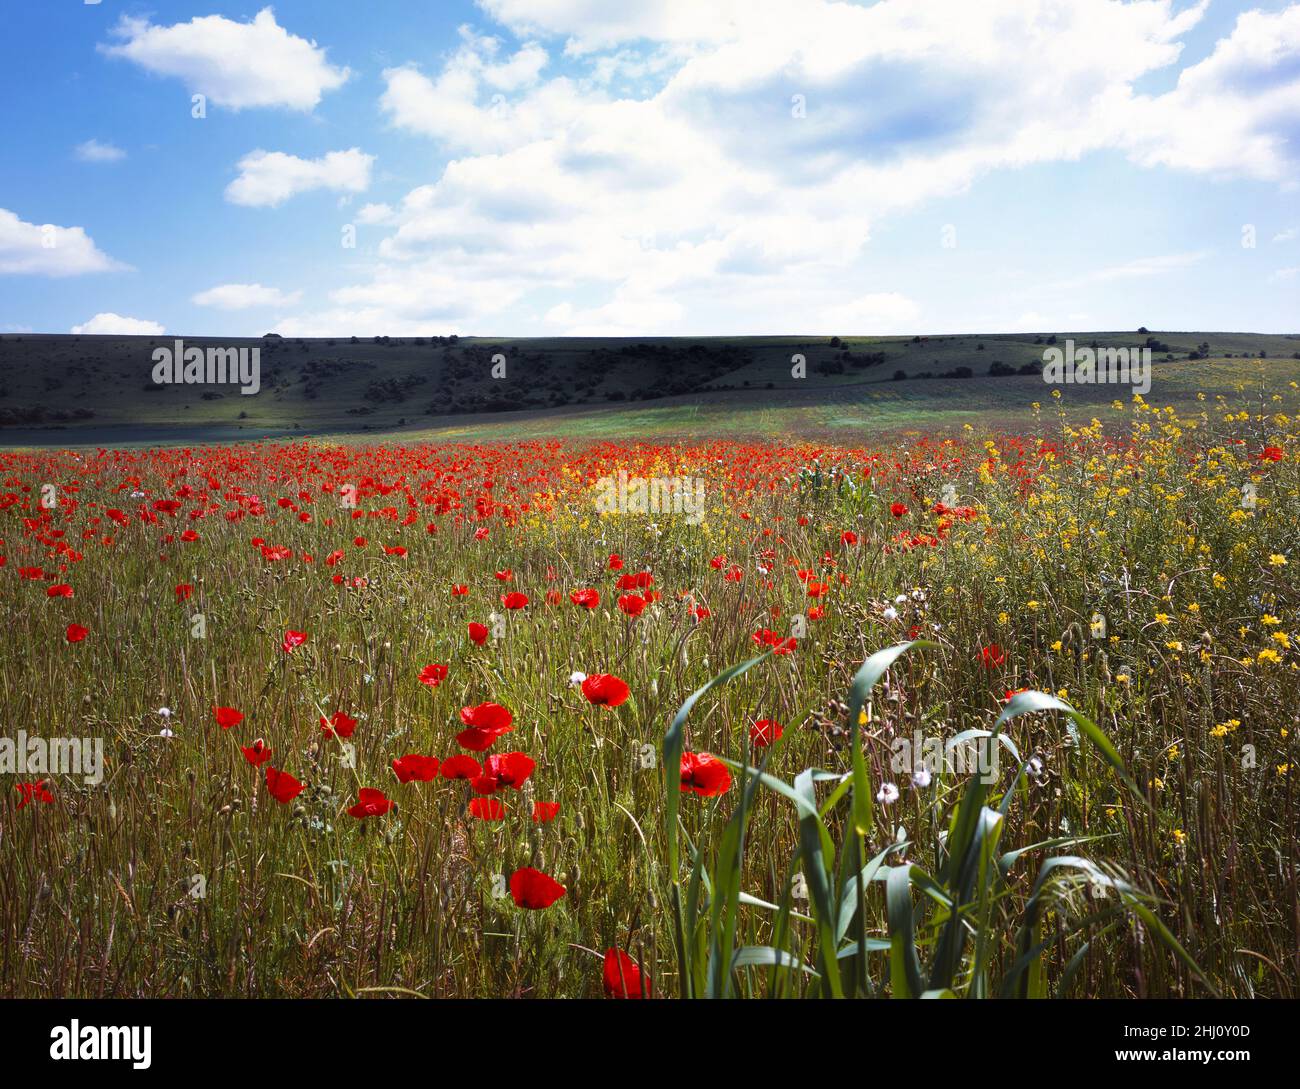 Field of red poppies in bloom blue sky white clouds copy space landscape & yellow flowers Stock Photo